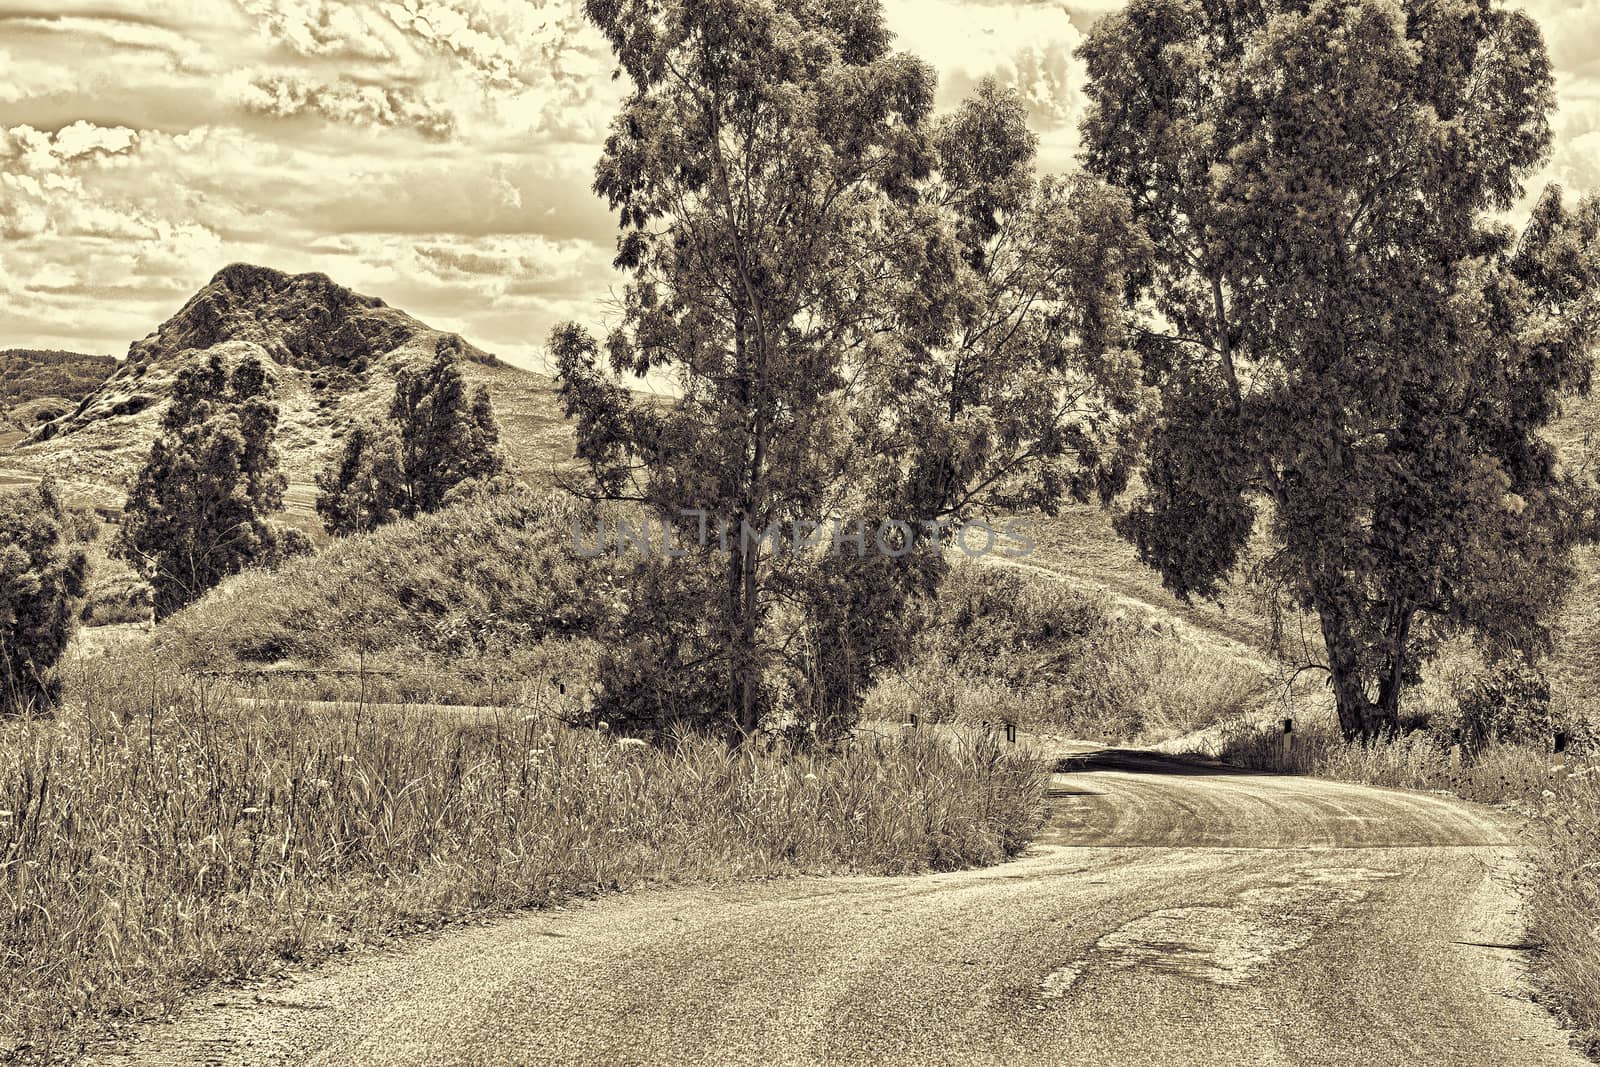 Old Broken Road between Spring  Fields of Sicily, Retro Image Filtered Style